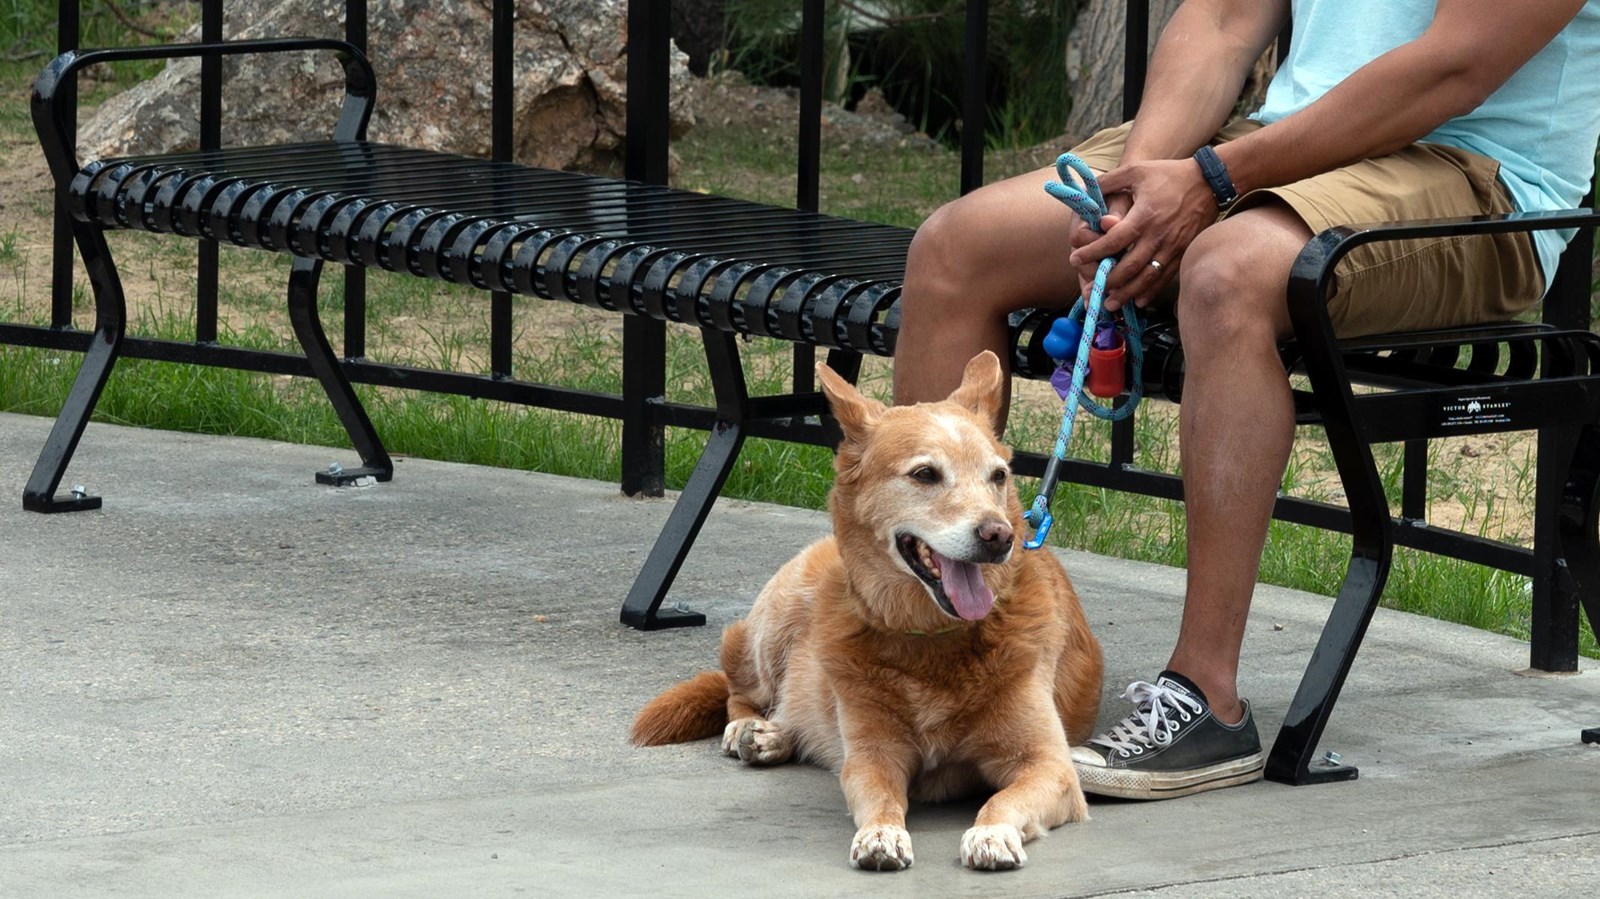 A male visitor sitting on a bench holding the leash of a yellow dog lying near his feet.